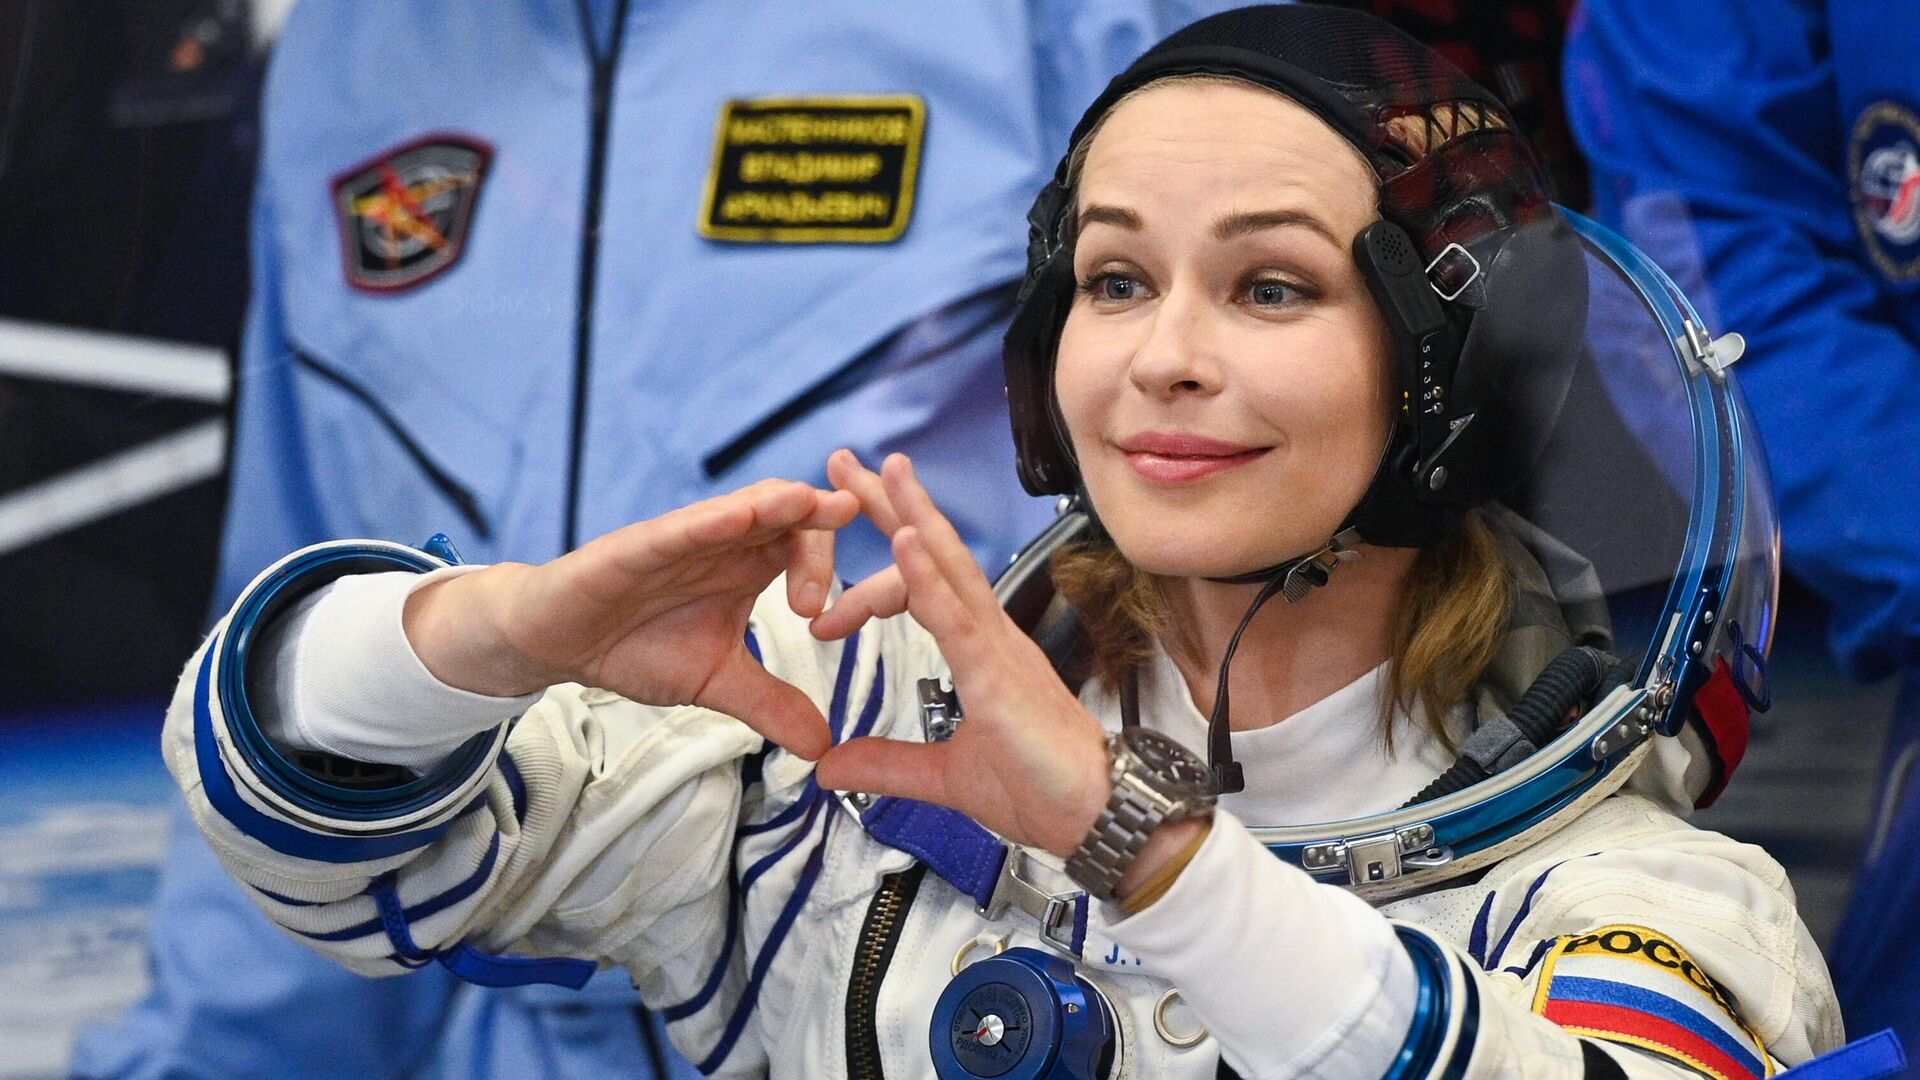 Actress Yulia Peresild of the ISS Expedition 66 prime crew puts on her spacesuit at the Baikonur Cosmodrome, in Baikonur, Kazakhstan. The launch of the Soyuz MS-19 mission to be involved in making the feature film The Challenge aboard the International Space Station is scheduled for 5 October 2021 at 11:55 Moscow time from the Baikonur Cosmodrome - Sputnik International, 1920, 05.10.2021